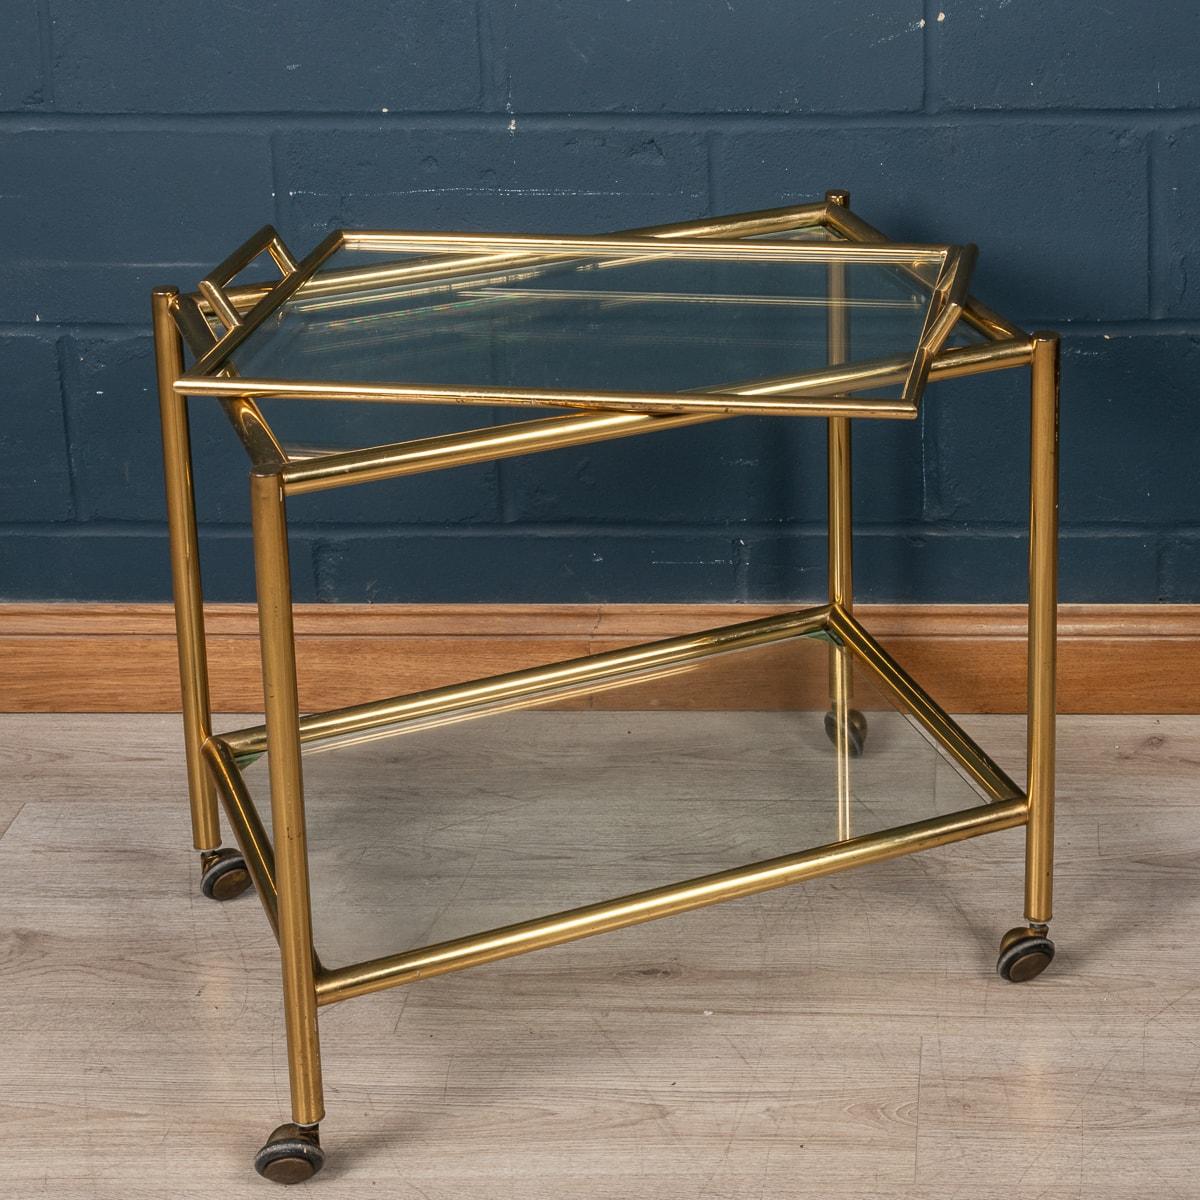 20th Century Italian Brass Framed Drinks Trolley With Lift-Out Tray, c.1980 4